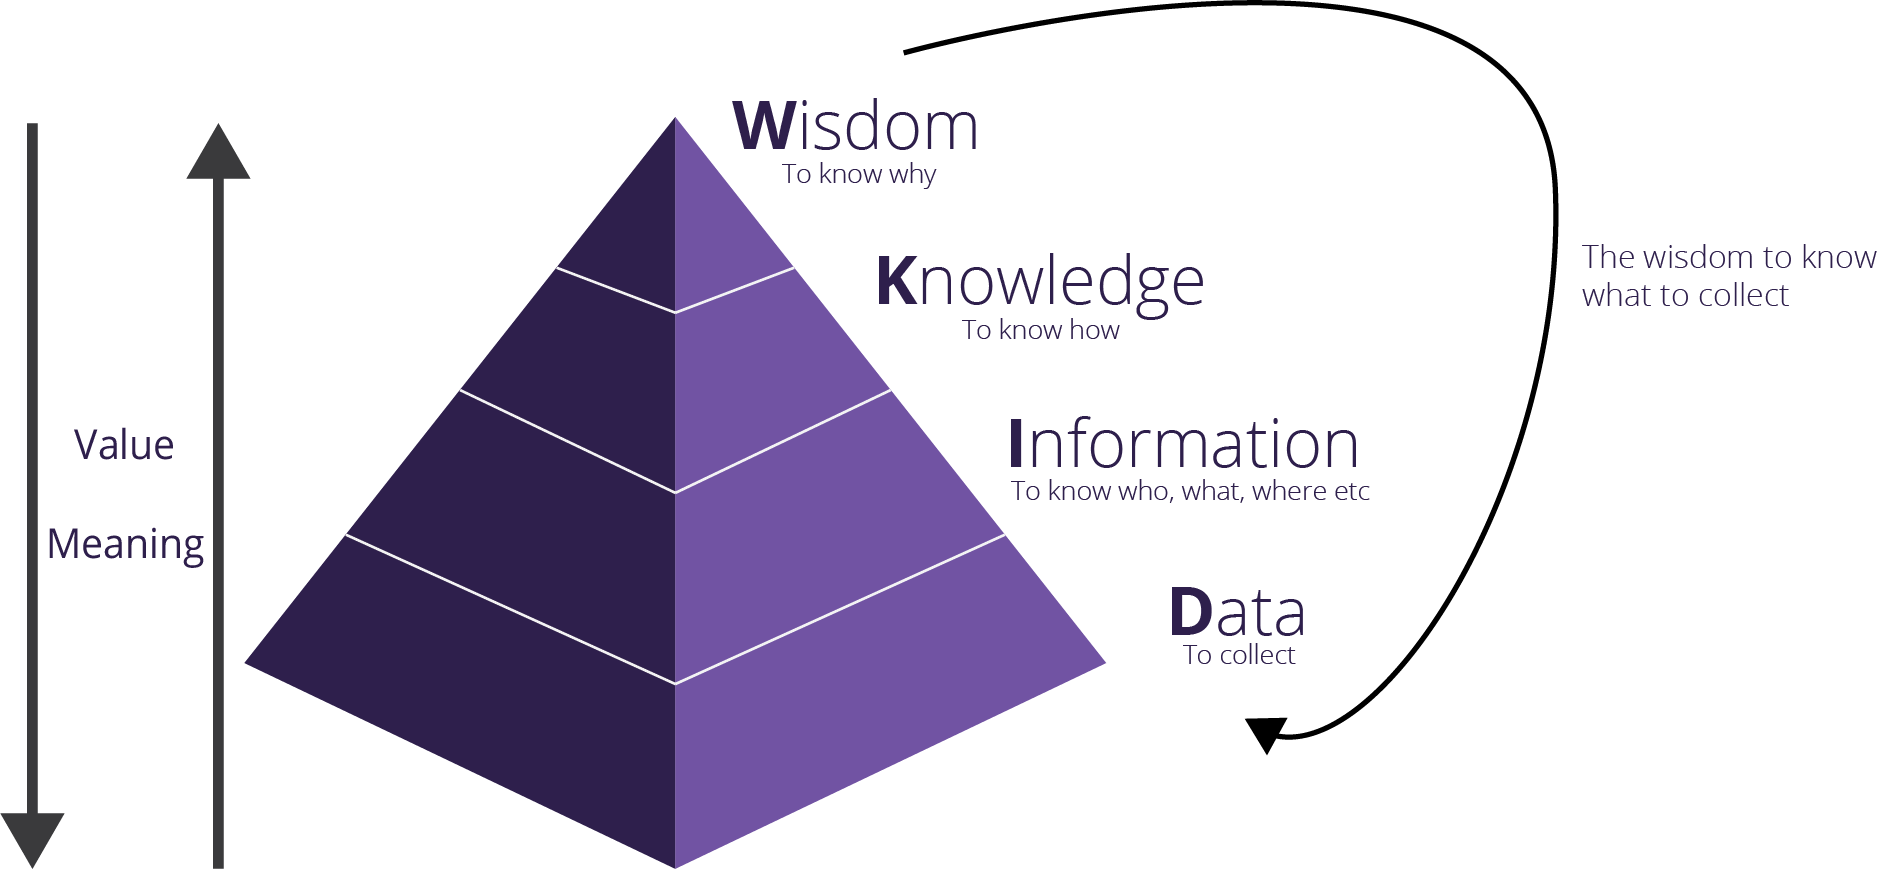 Using the DIKW Pyramid